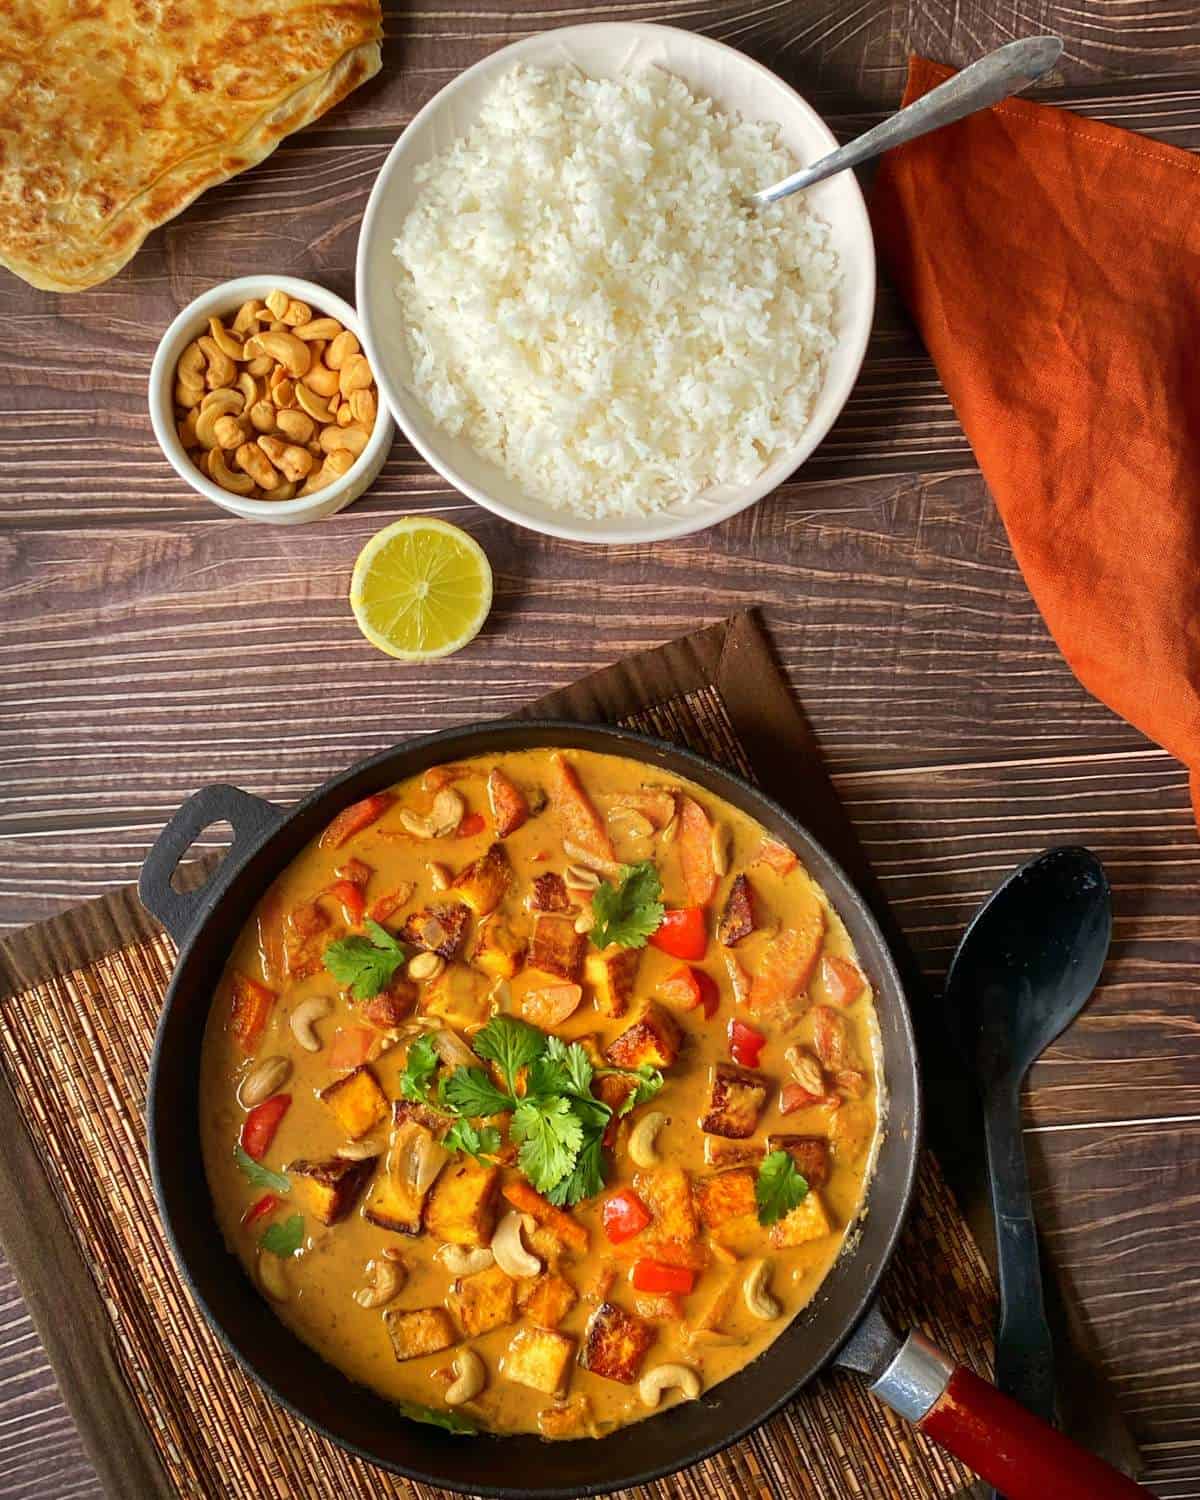 The cooked Paneer Curry garnished with coriander served in the frypan on a wooden table with fluffy white rice, cashew nuts and nan bread to the side.